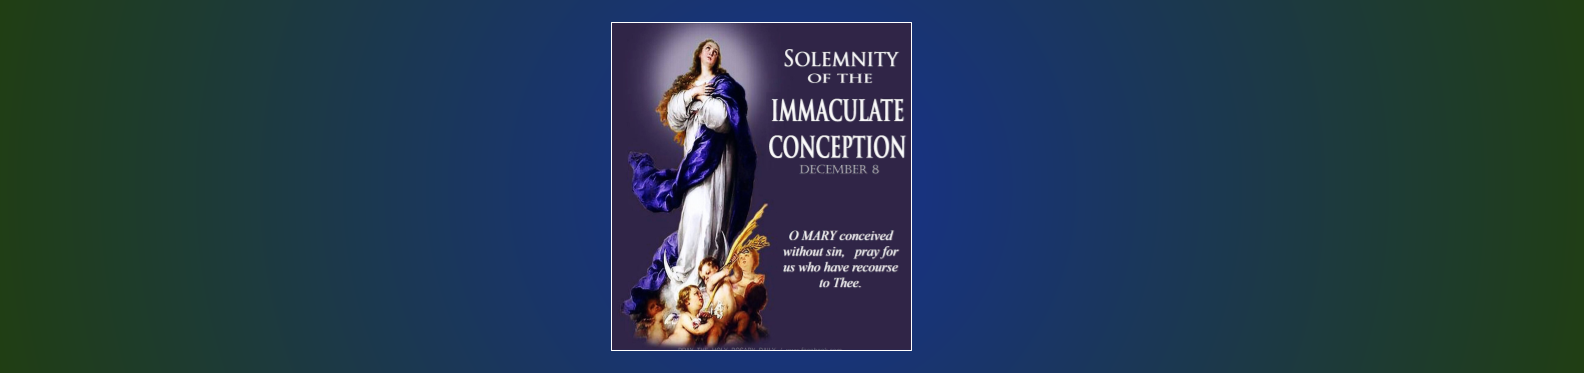 Immaculate Conception December 8